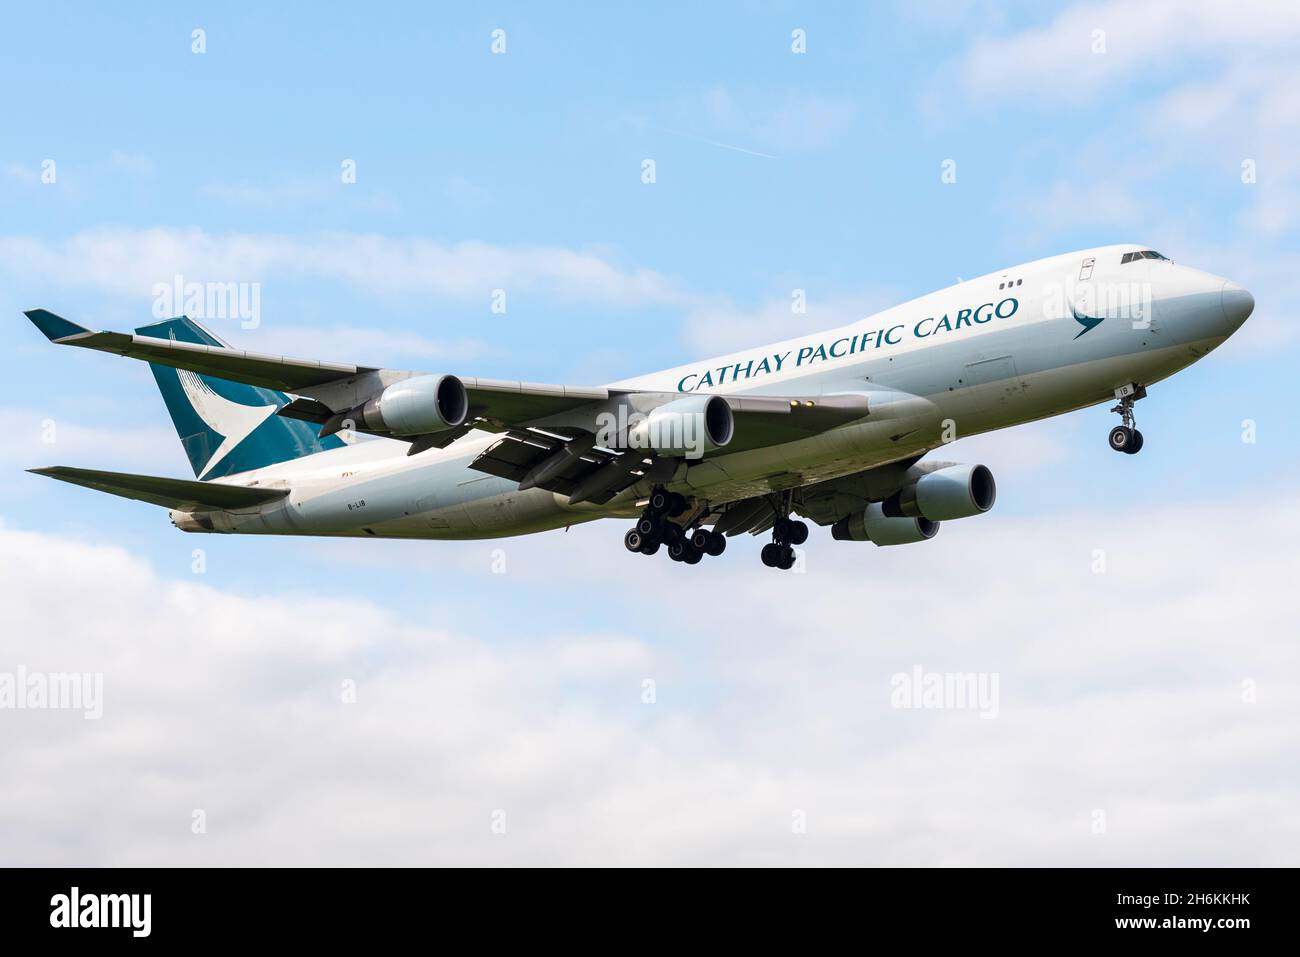 Cathay Pacific Cargo Boeing 747 Jumbo Jet freight airliner jet plane B-LIB landing at London Heathrow Airport, UK. Freighter carrier on finals to land Stock Photo